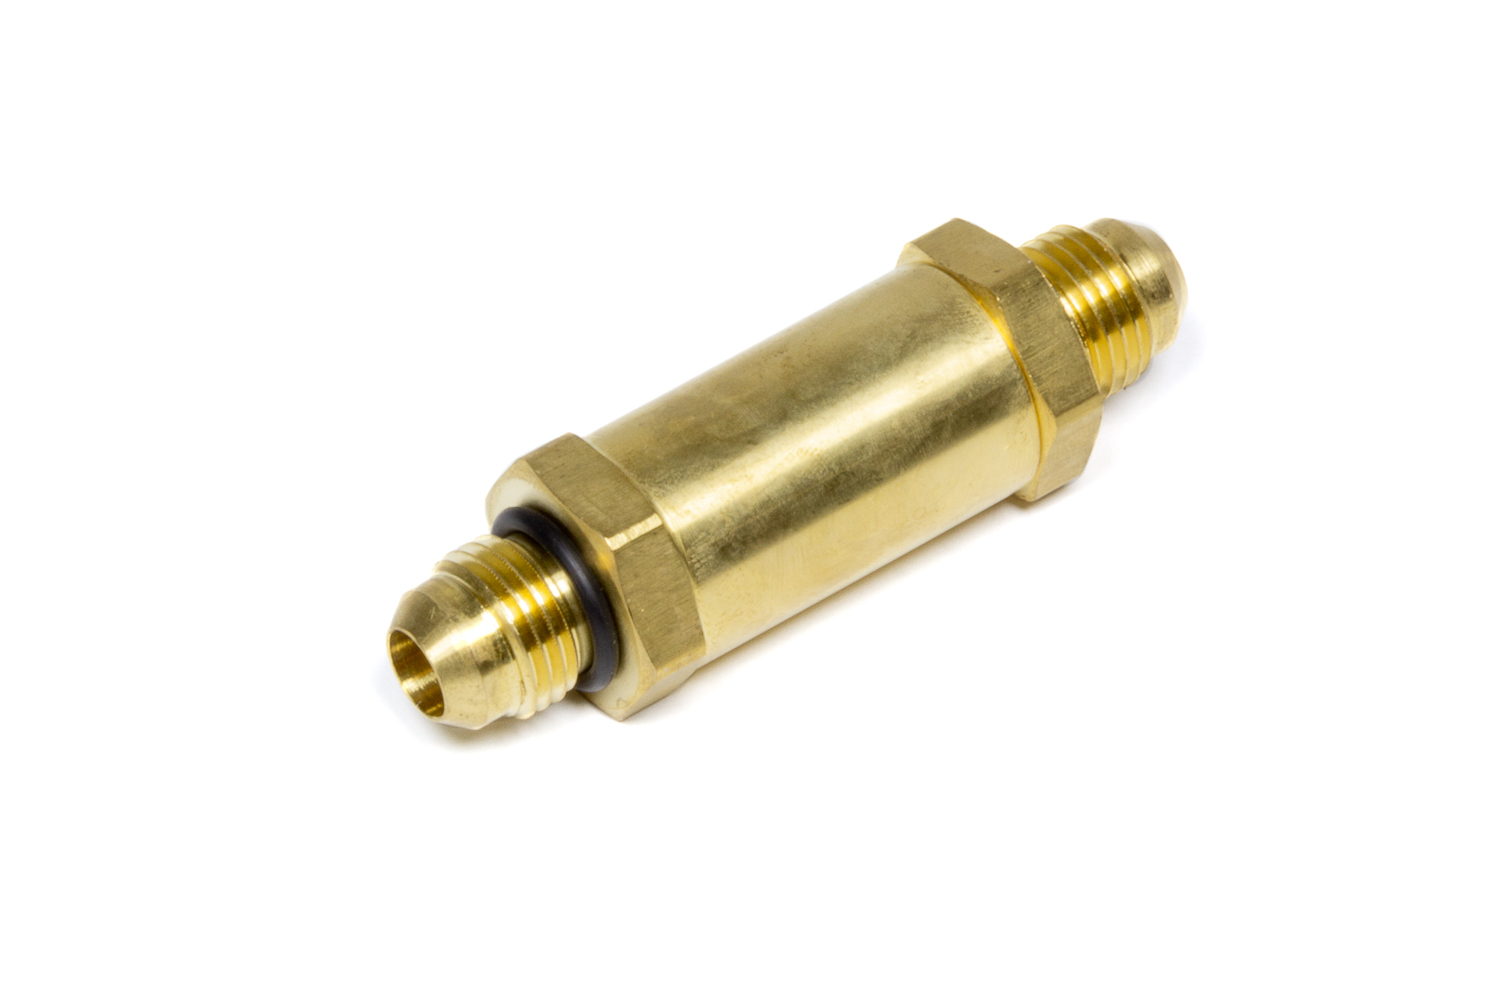 Enderle 6001 Check Valve, 6 AN Male Inlet, 6 AN Male Outlet, Brass, Natural, Each